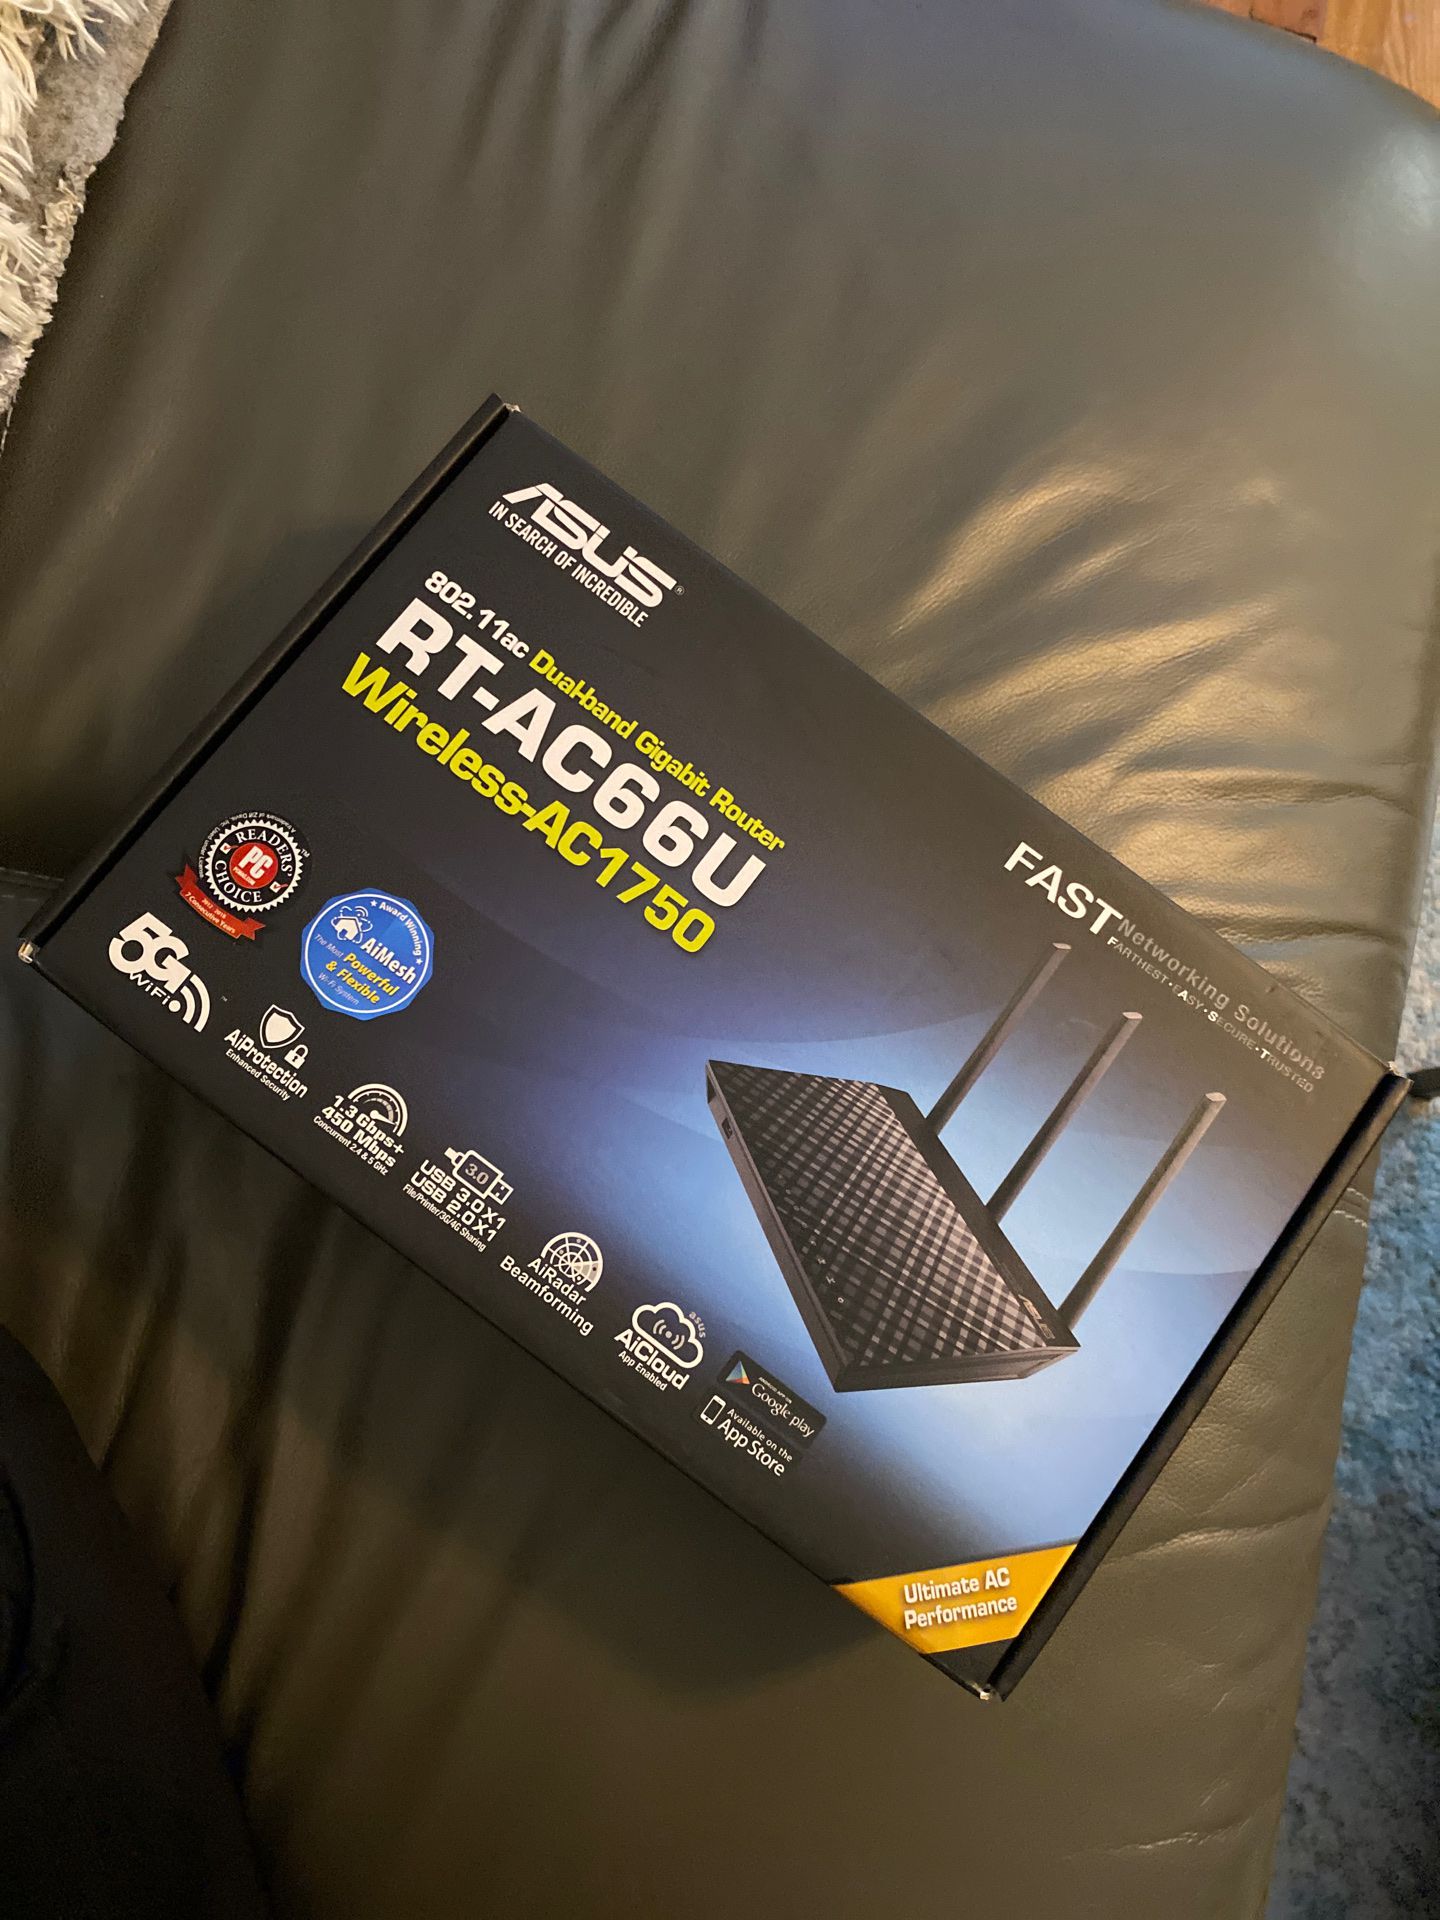 ASUS RT-AC66U wireless router